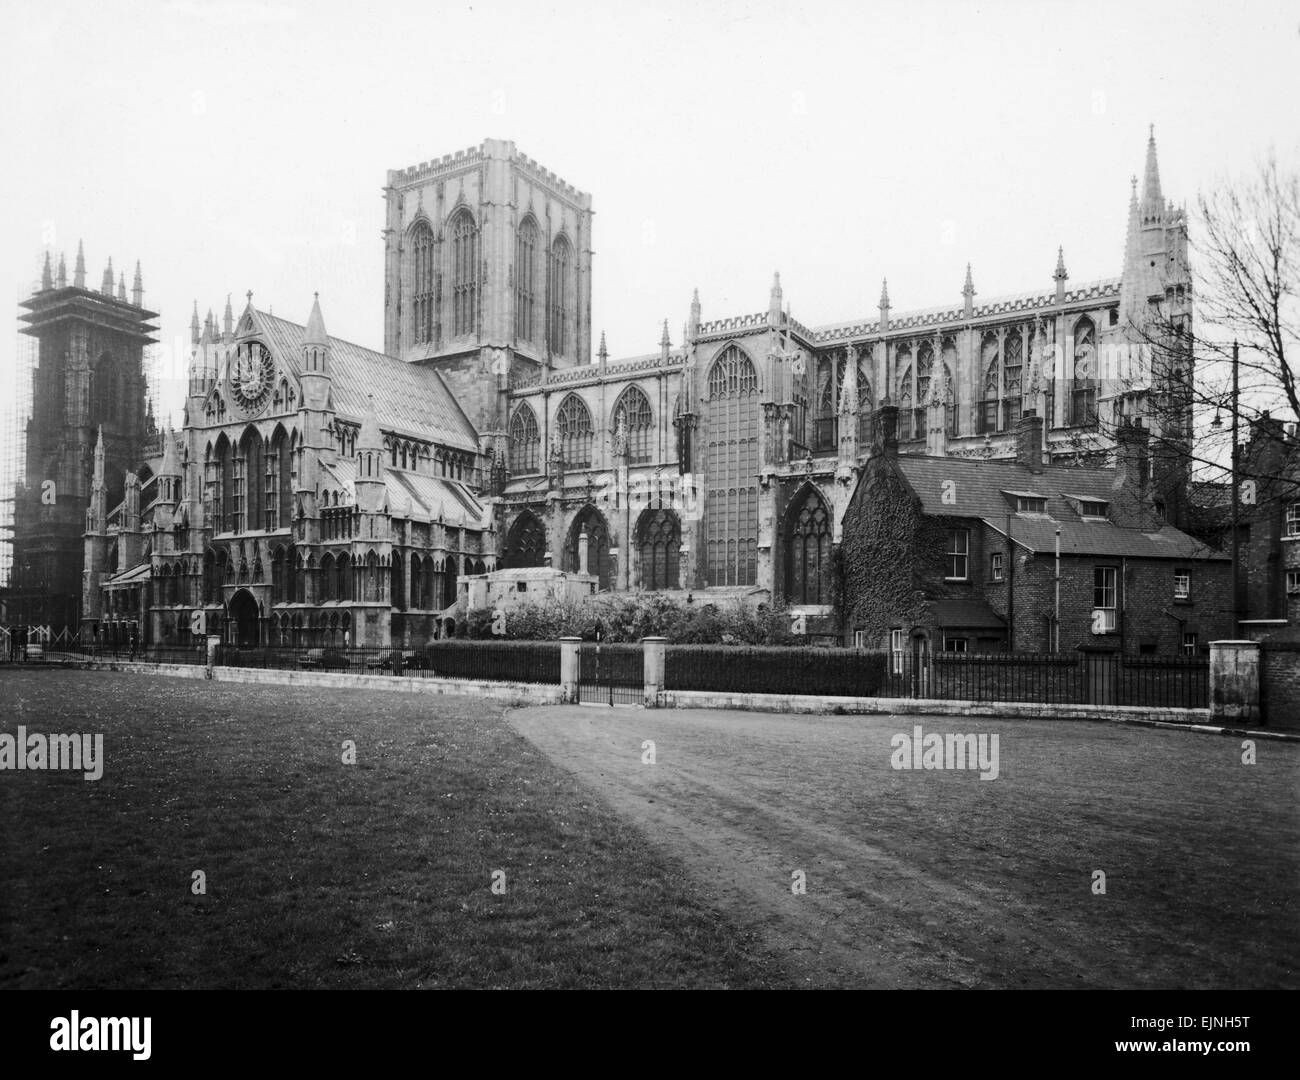 A general view of York Minster, in York, in England The Gothic York Minster contains medieval stained glass; the south transept was severely damaged by fire 1984, but has been restored. Circa 1970 Stock Photo